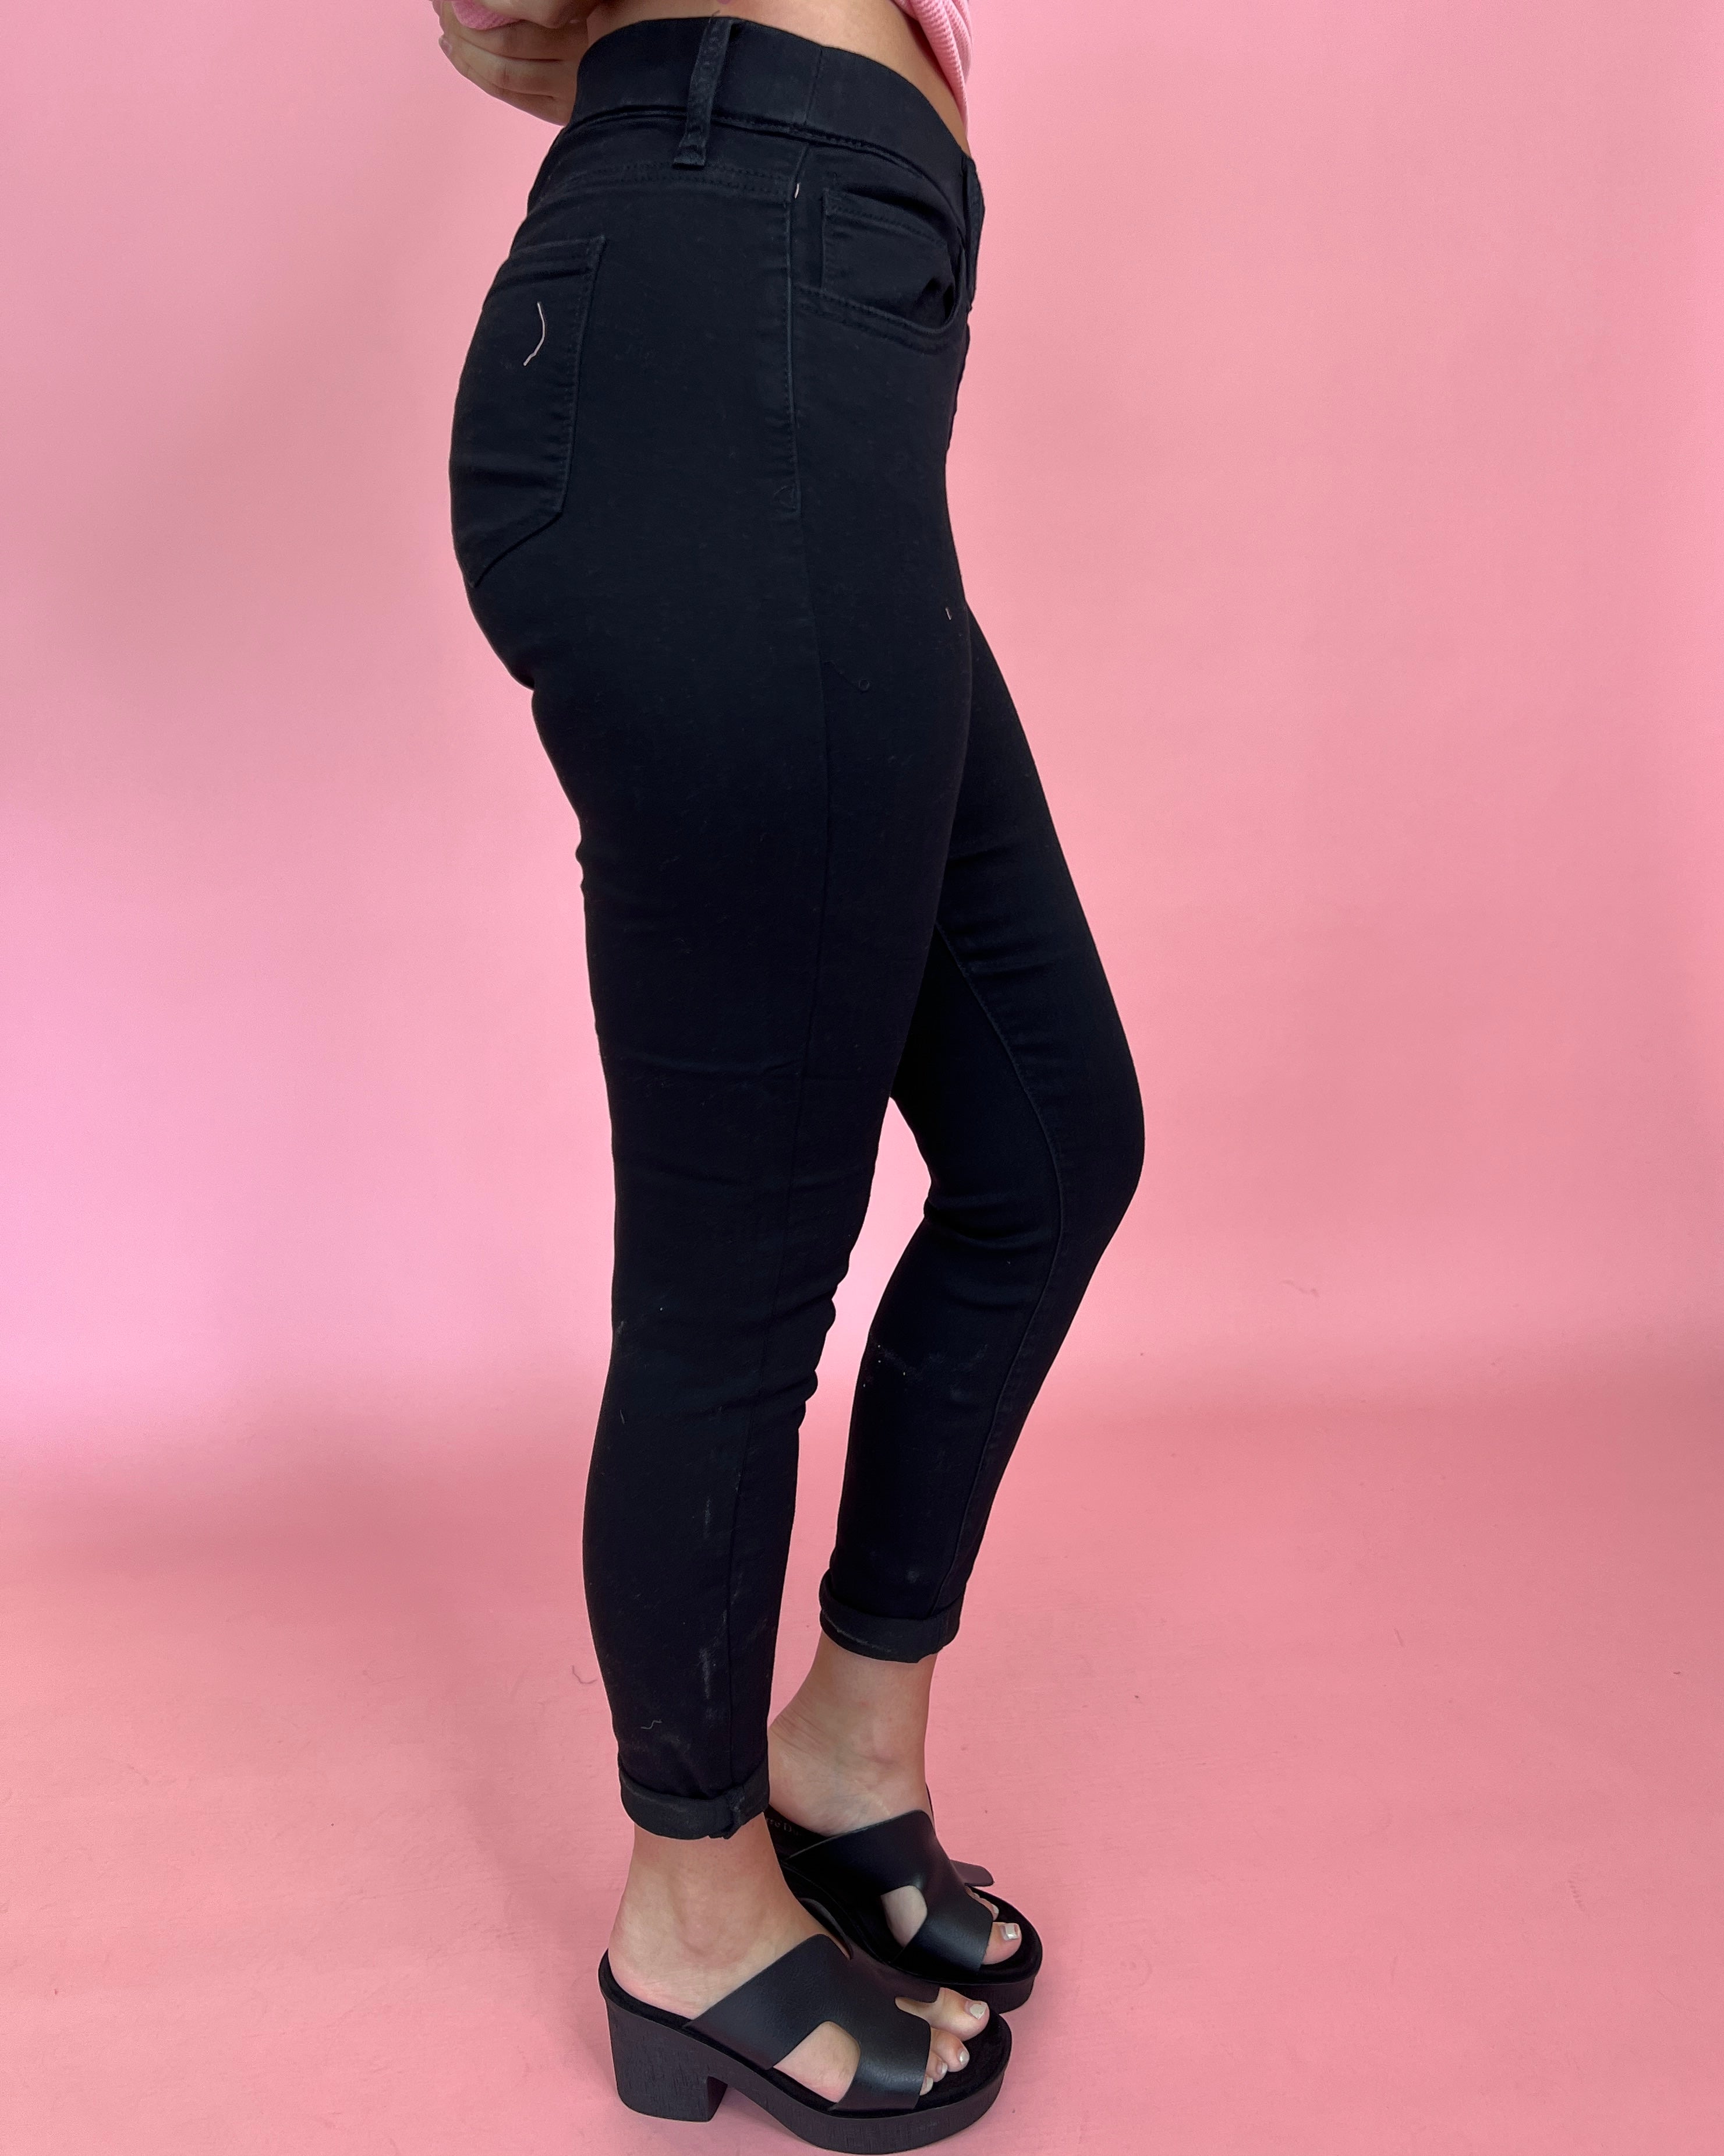 Casual Feelings Black Pull On Skinny Jeans-Shop-Womens-Boutique-Clothing